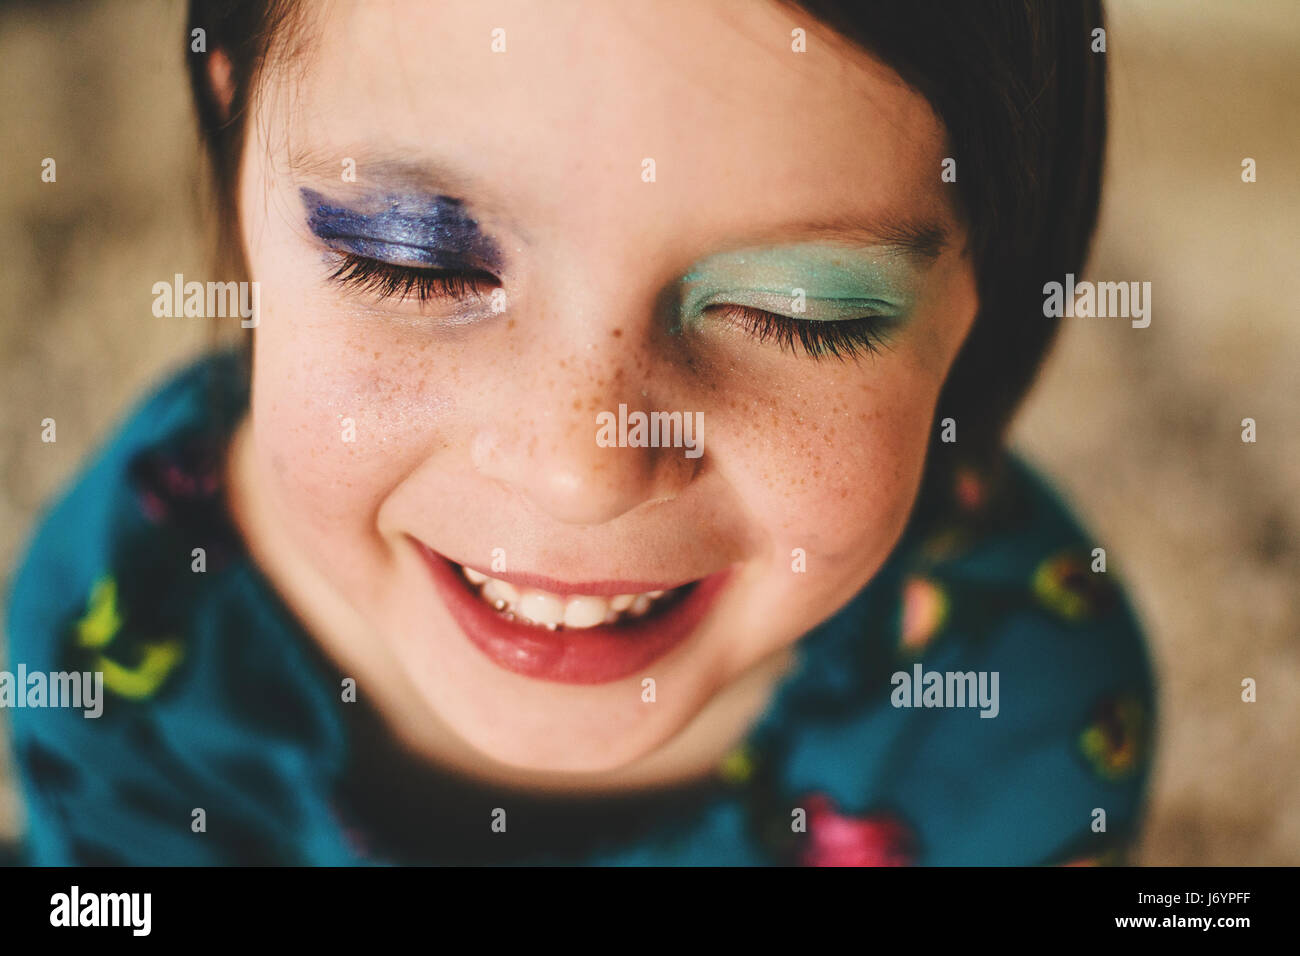 Portrait of a smiling girl wearing eye shadow Stock Photo